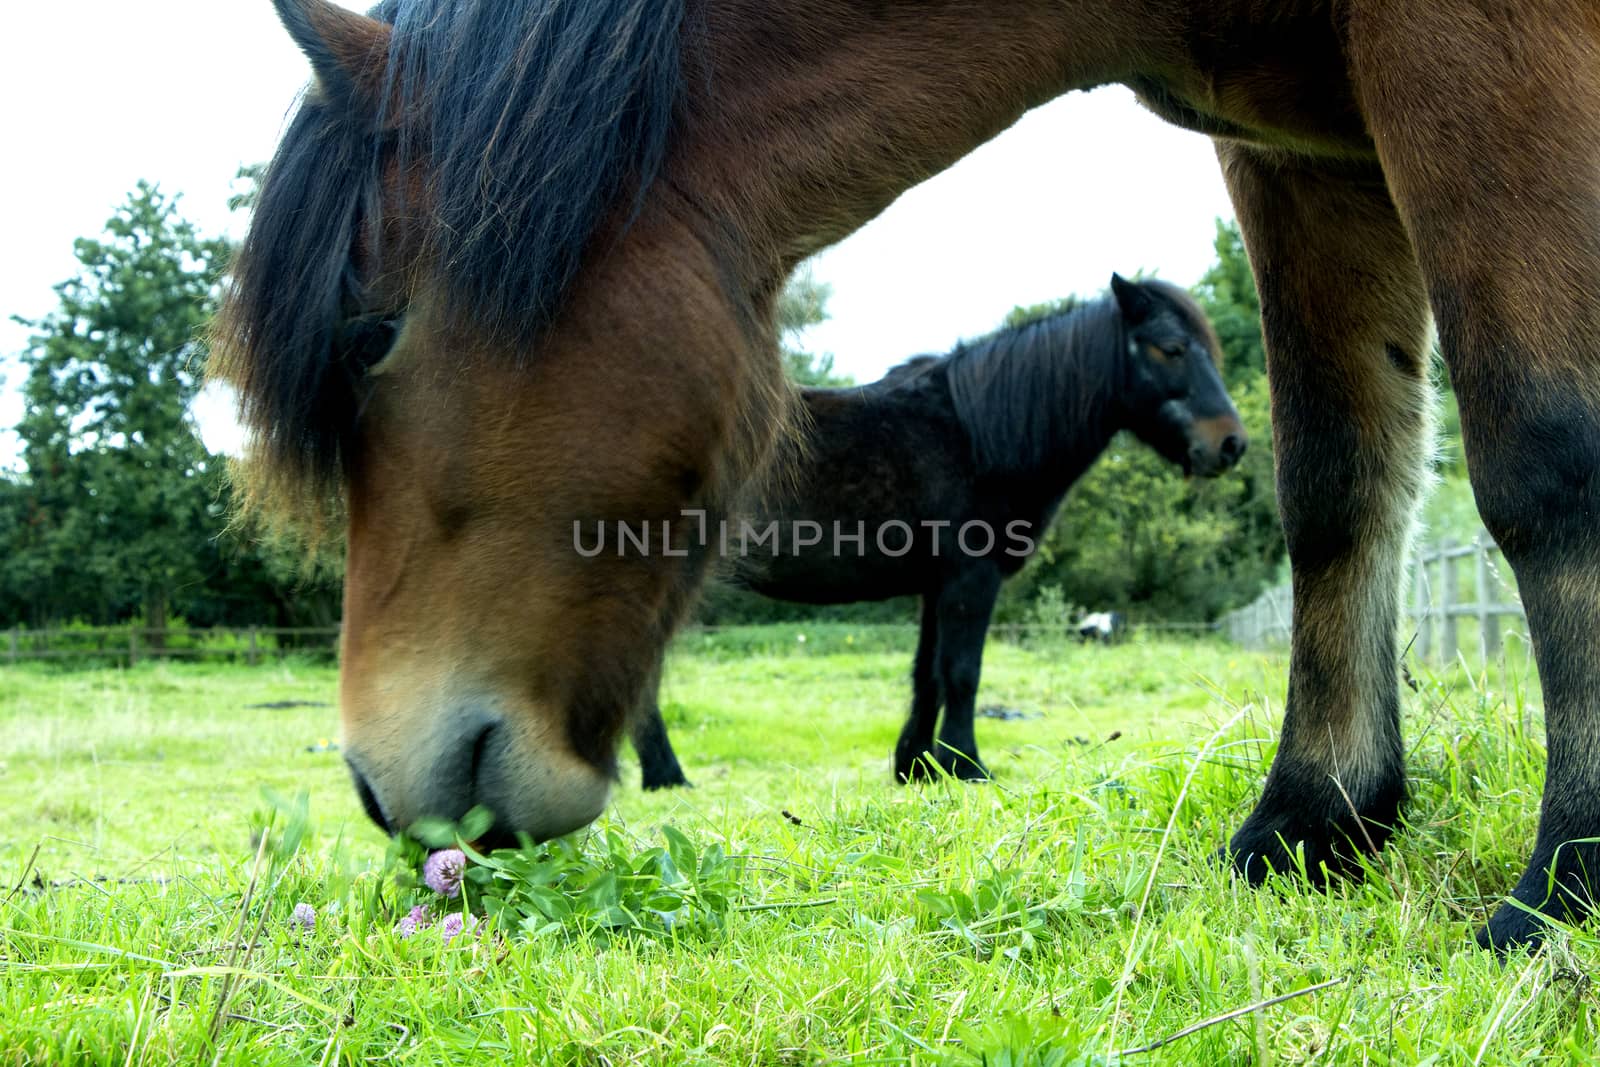 Two horses standing and eating on a grass field outdoors in the summer